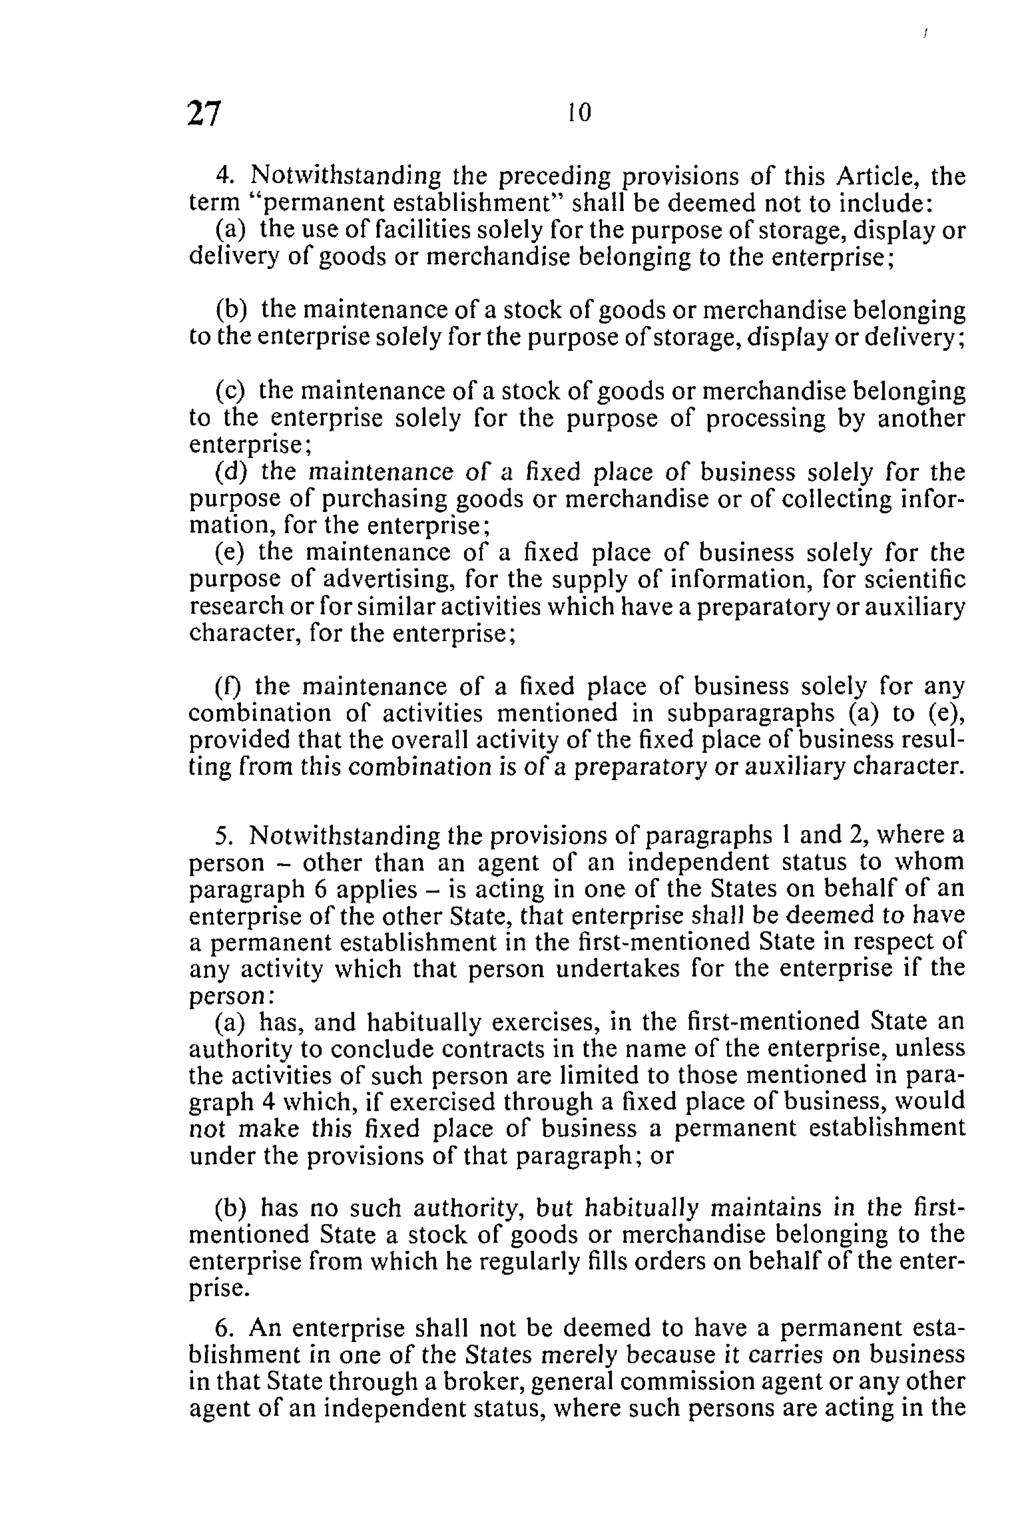 4. Notwithstanding the preceding provisions of this Article, the term "permanent establishment" shall be deemed not to include: (a) the use of facilities solely for the purpose of storage, display or